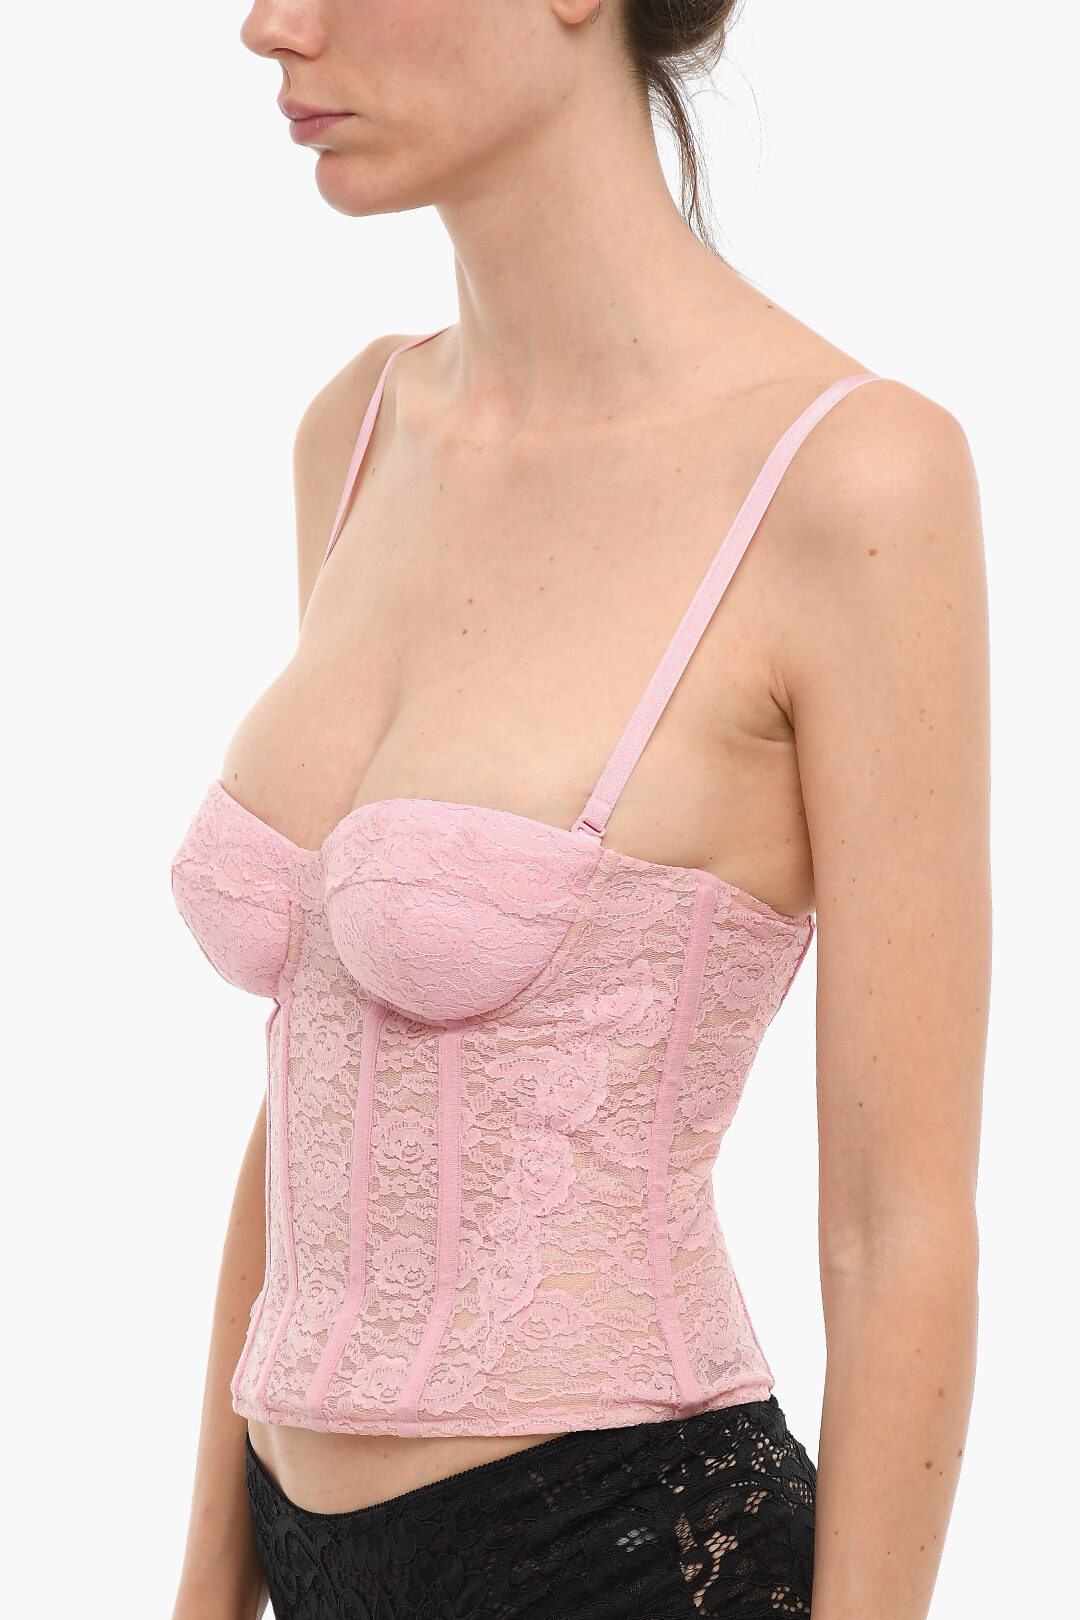 Moschino COUTURE! Solid Color Lace Corset women - Glamood Outlet